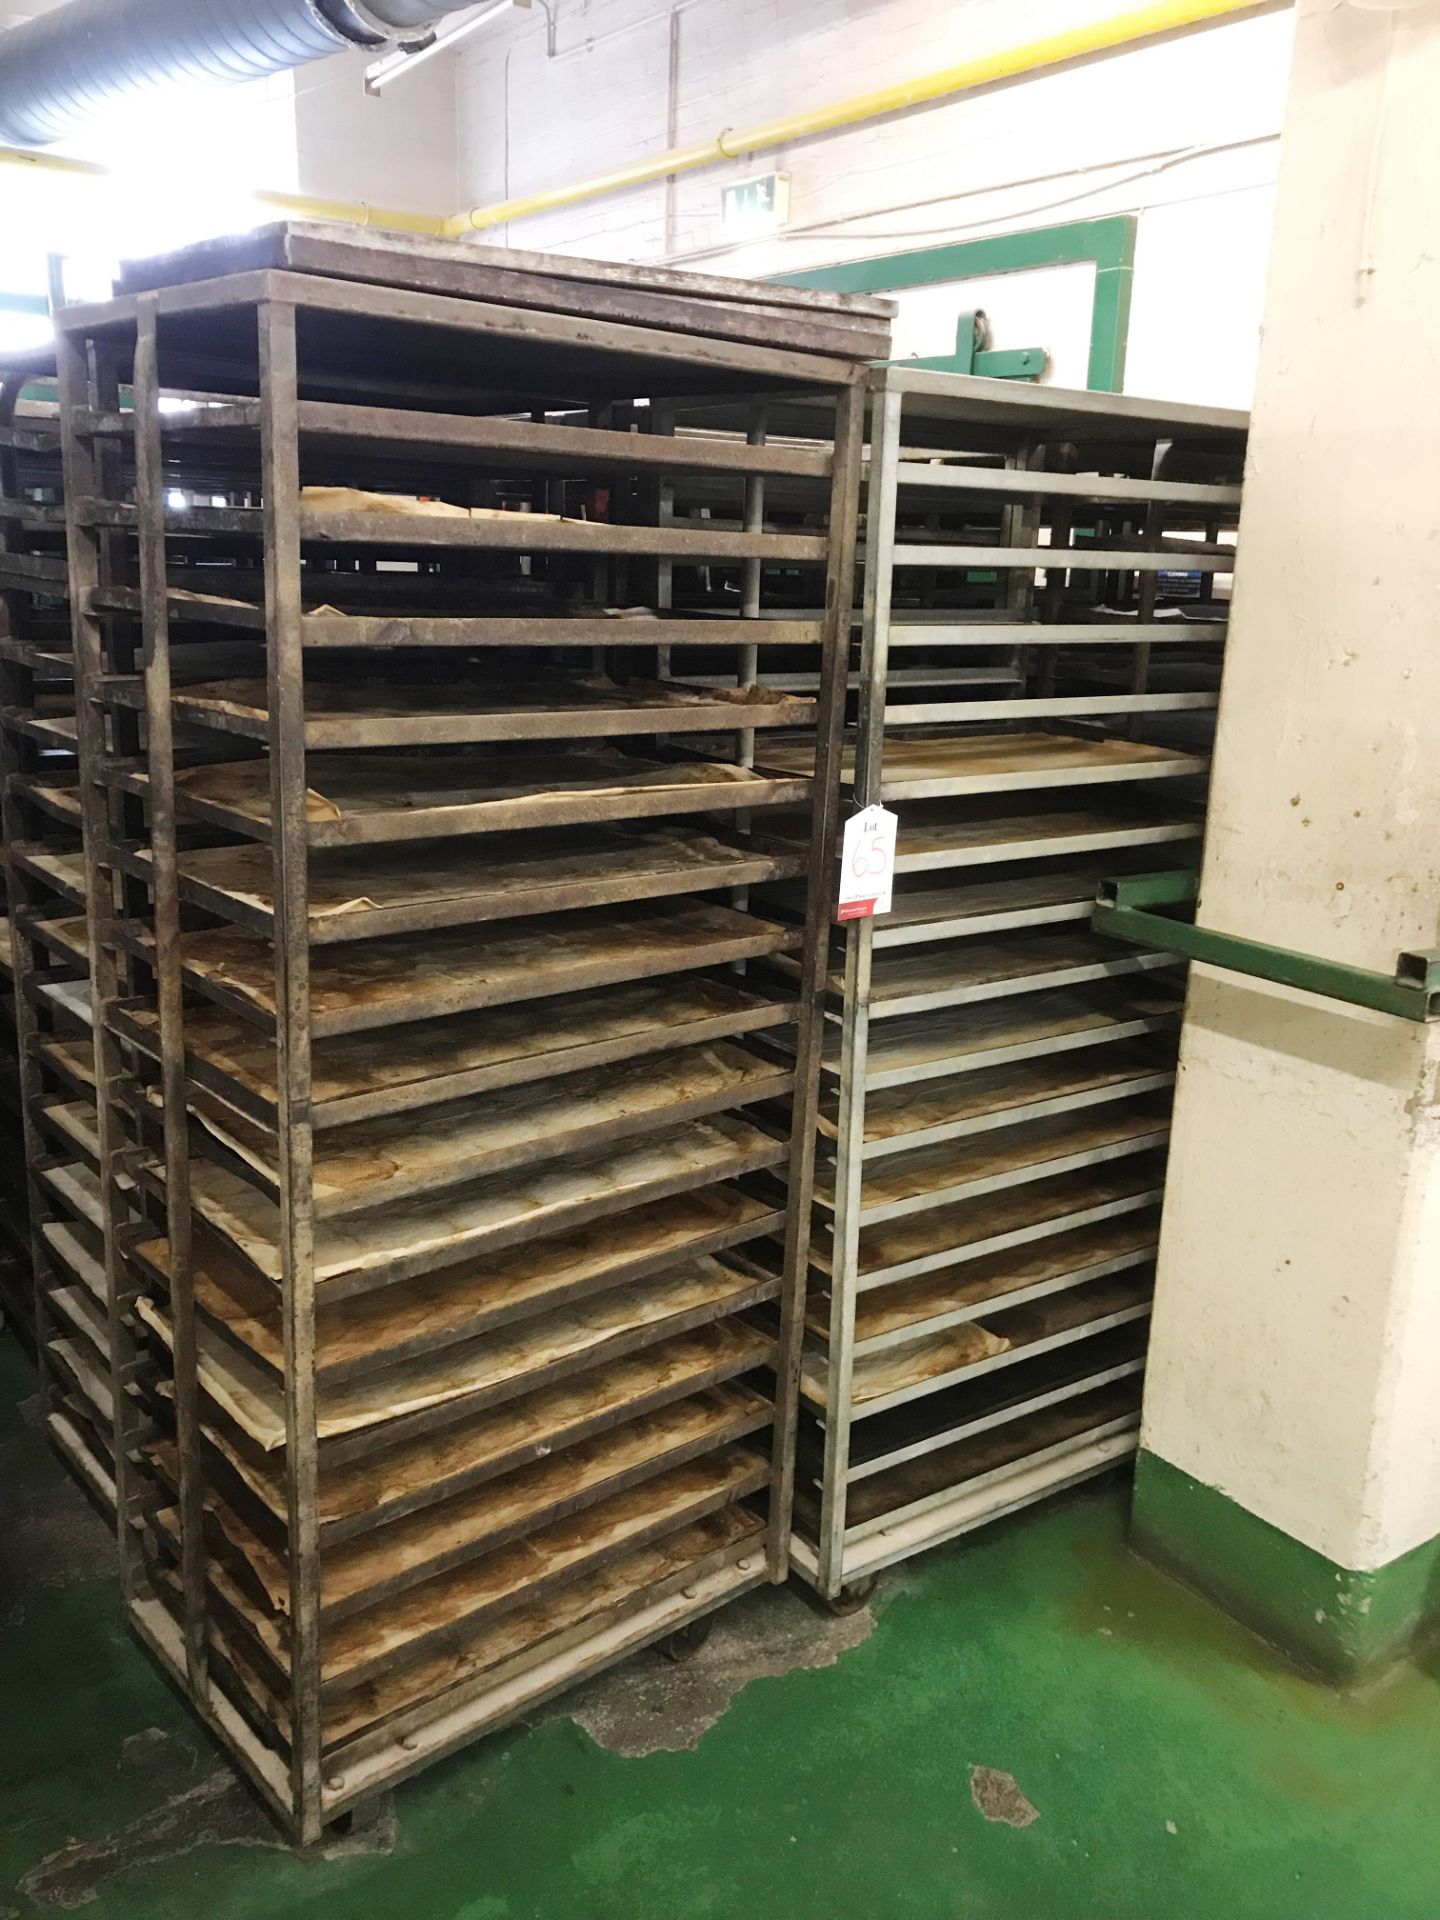 12 x Various Bakery Racks & Trays - As Pictured